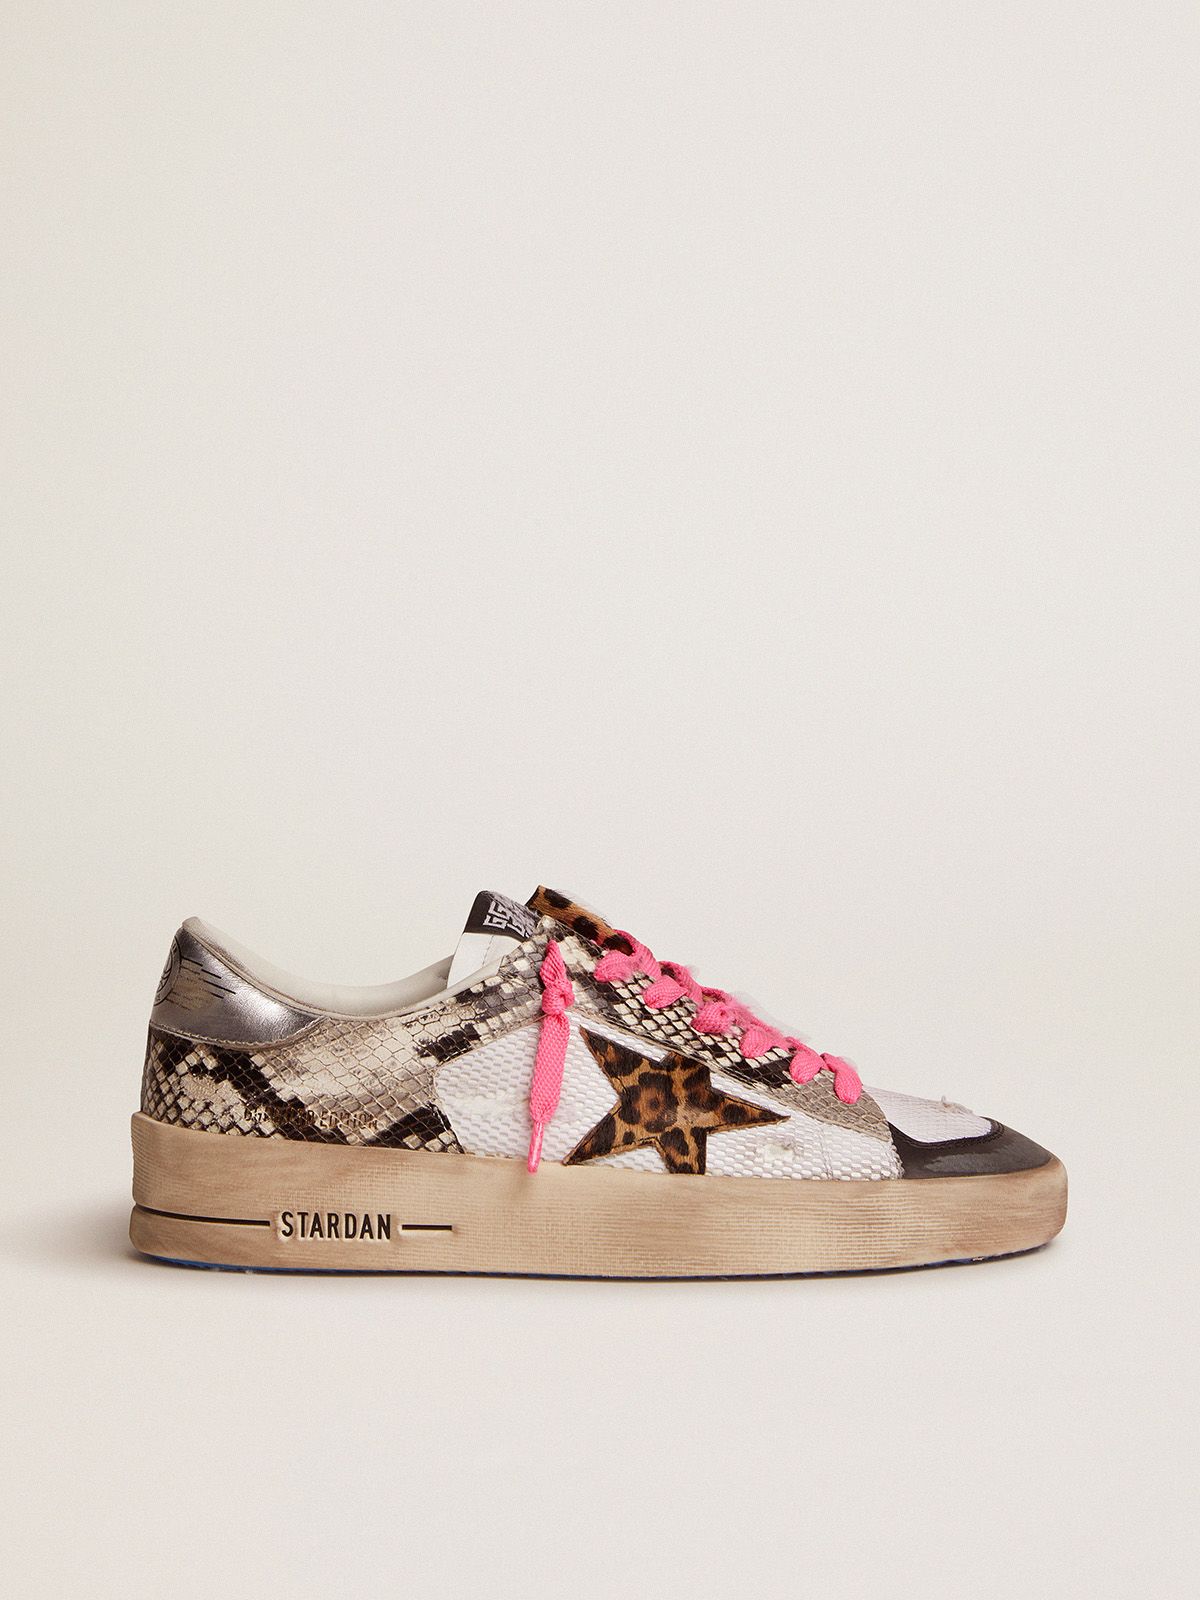 golden goose snake-print with and leopard-print leather Stardan sneakers LAB upper star skin pony